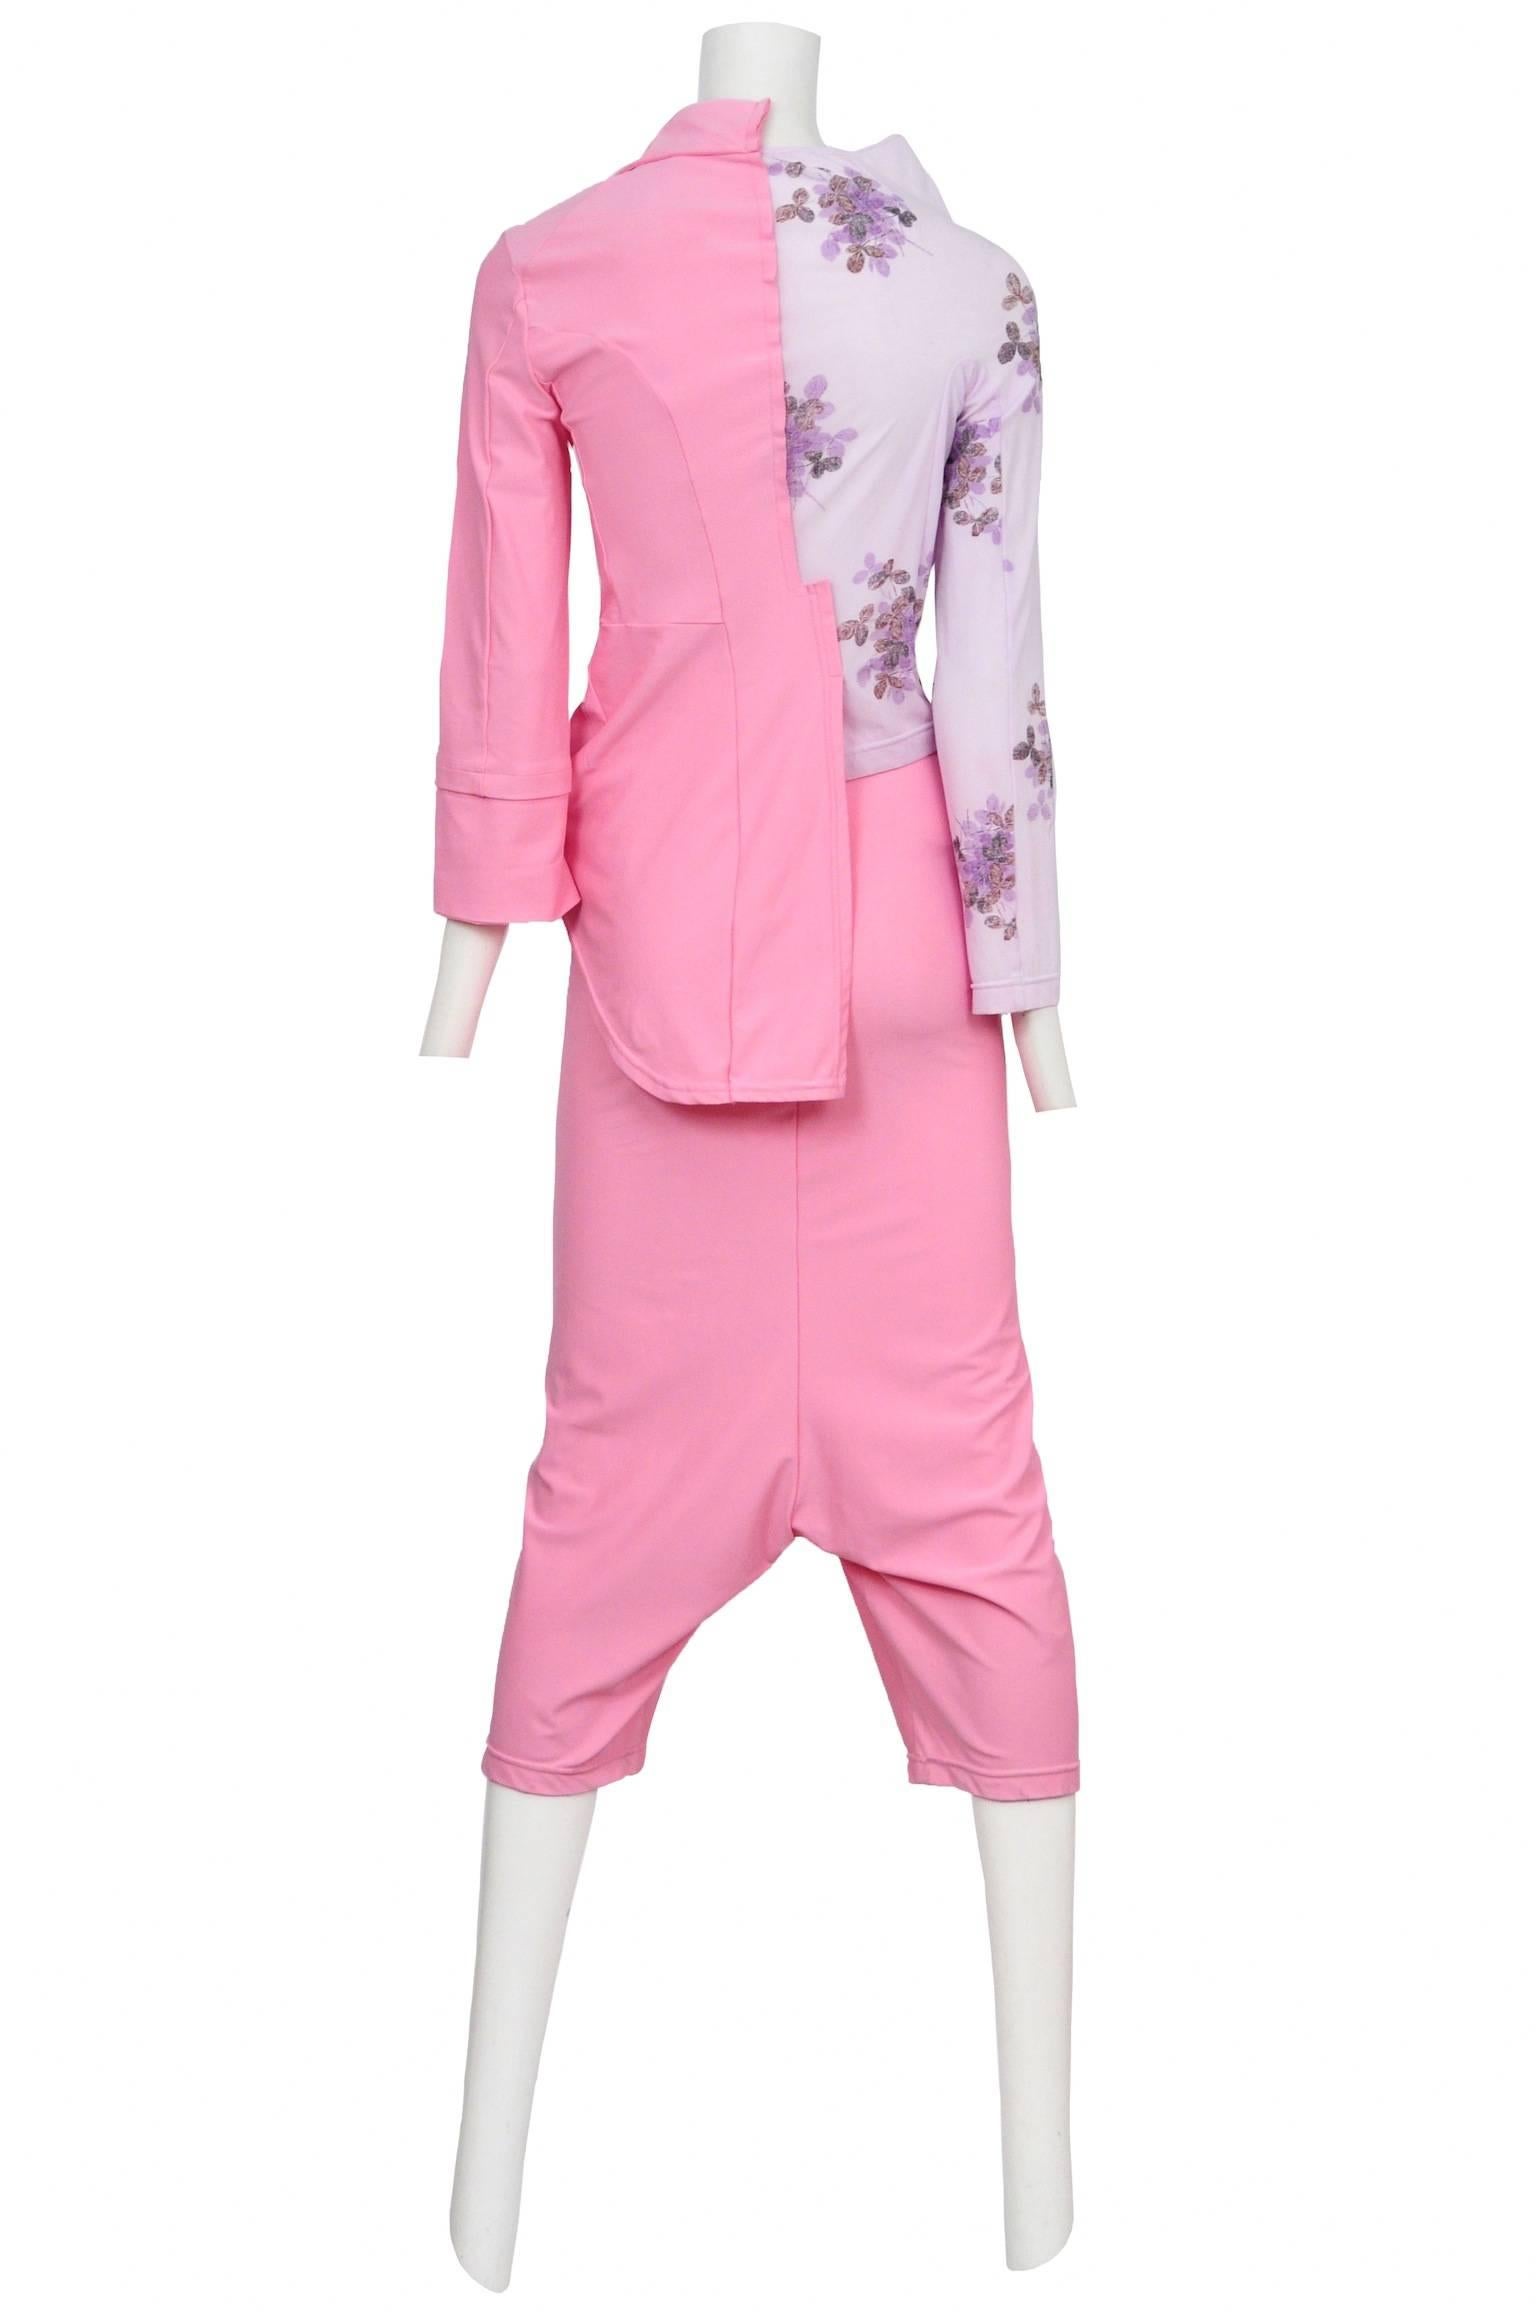 Vintage Comme des Garcons ensemble featuring a long sleeve top with one side made out of a lilac floral print and the other, in a shade of bubble gum pink, in the shape of a jacket. The matching bubble gum pink pants are drop crotch in style and